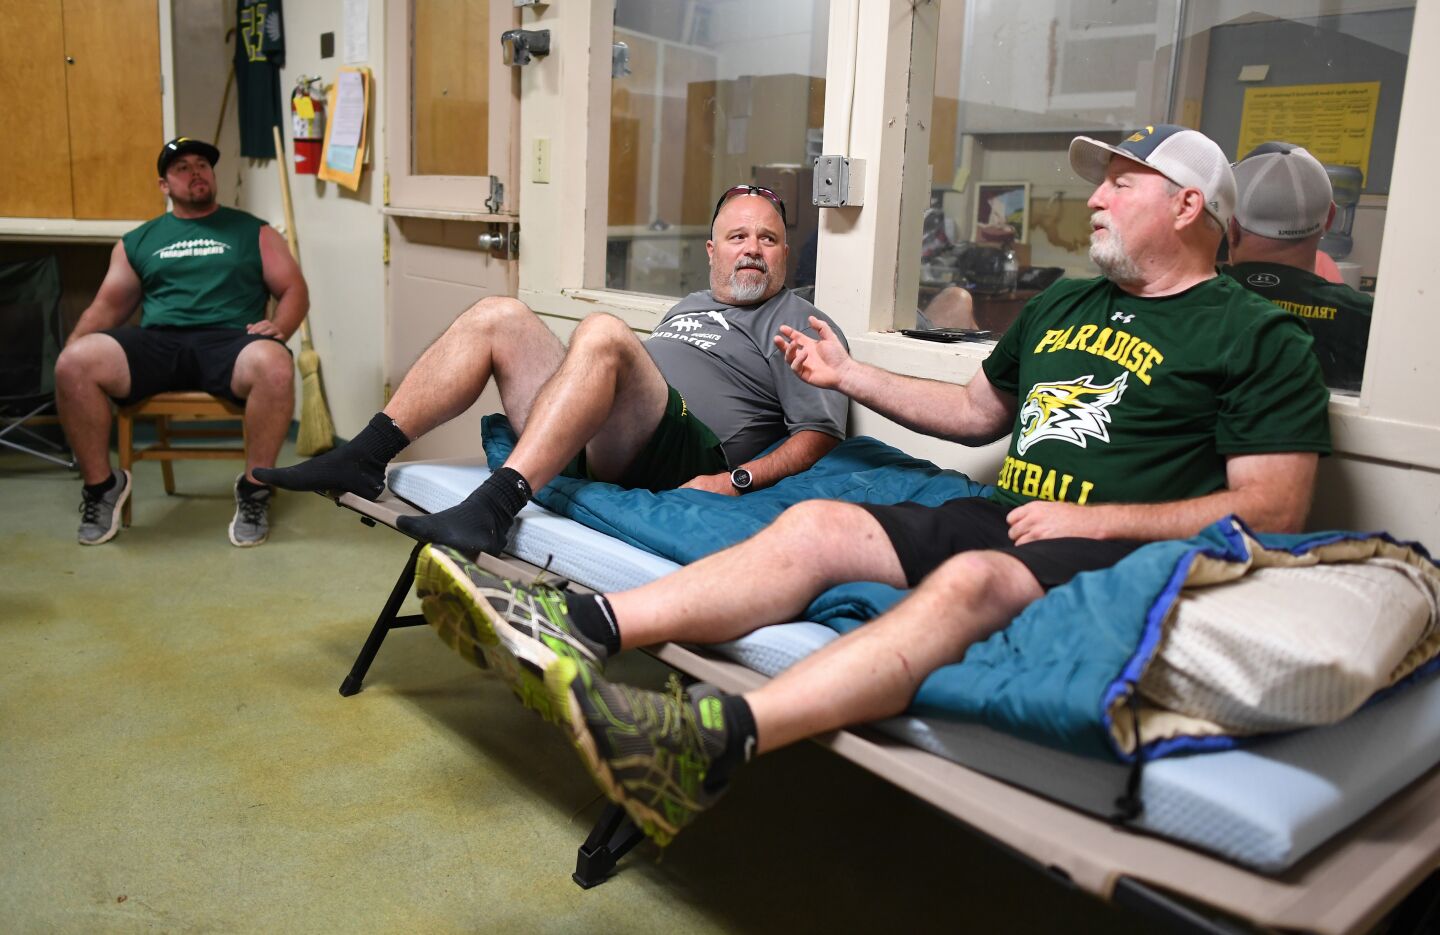 Paradise coach coach Rick Prinz, right, speaks with assistants Bobby Richards, left, and Nino Pinocchio in his office.